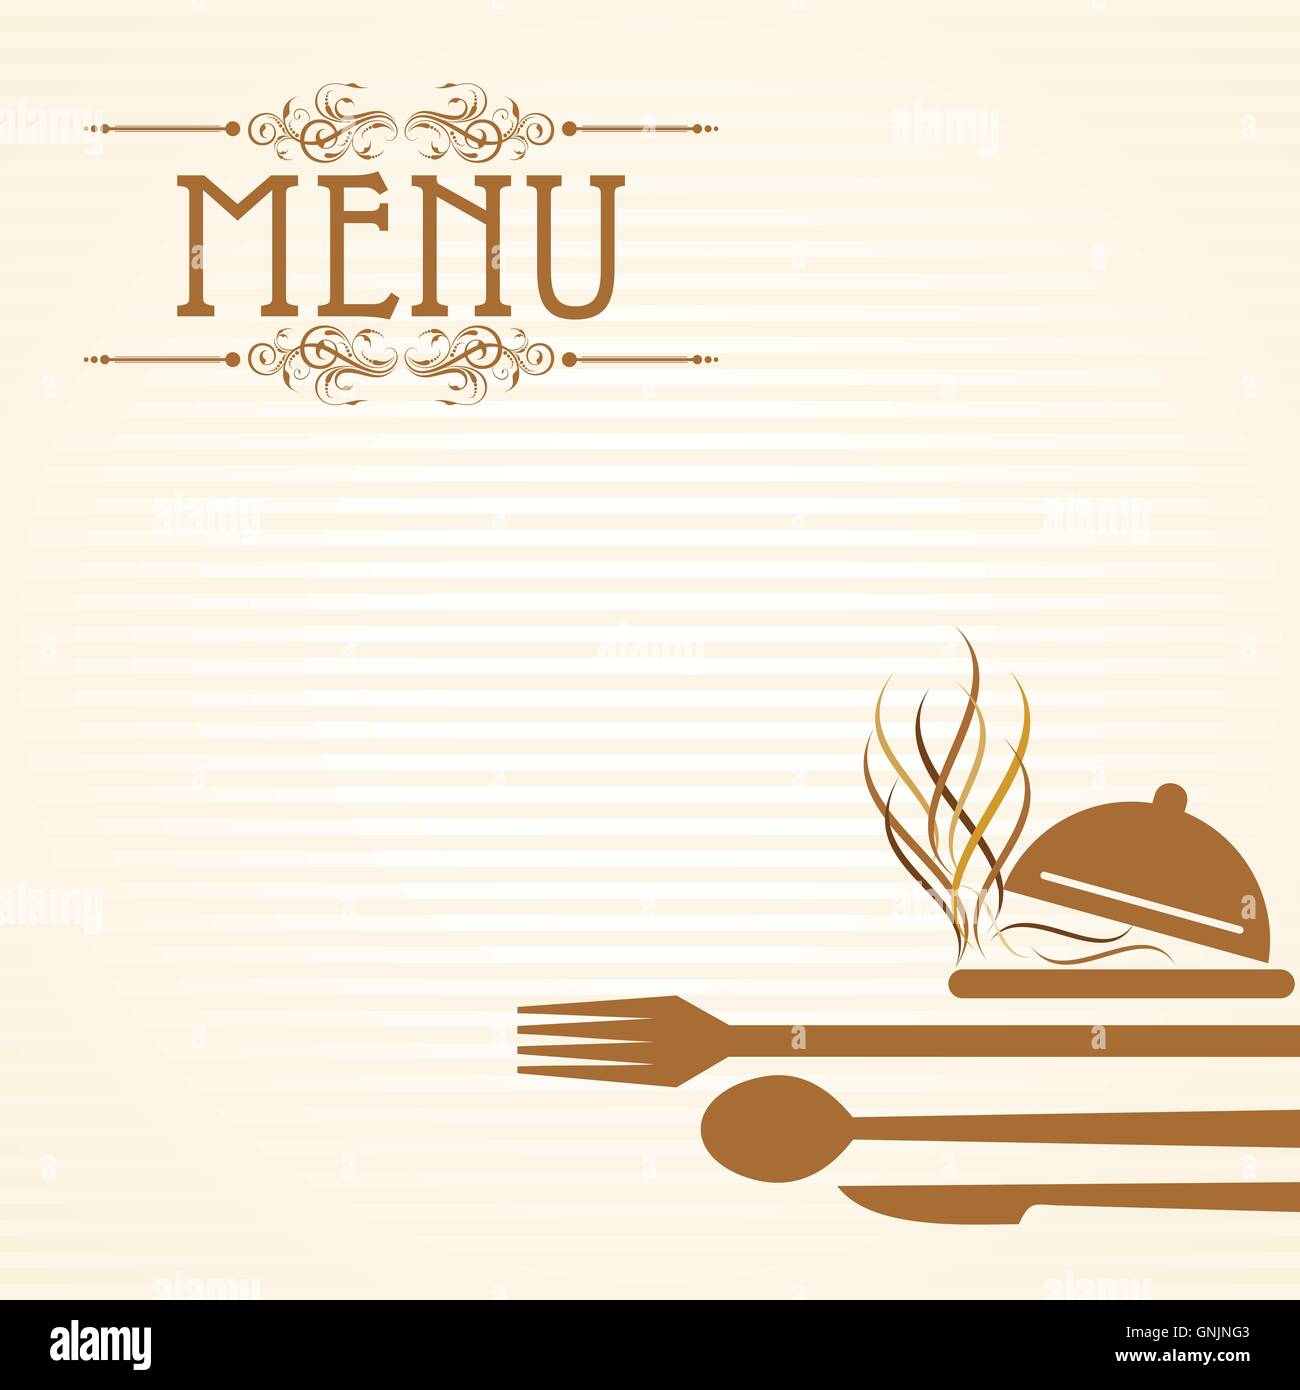 Hotel menu card with food Stock Vector Images - Alamy